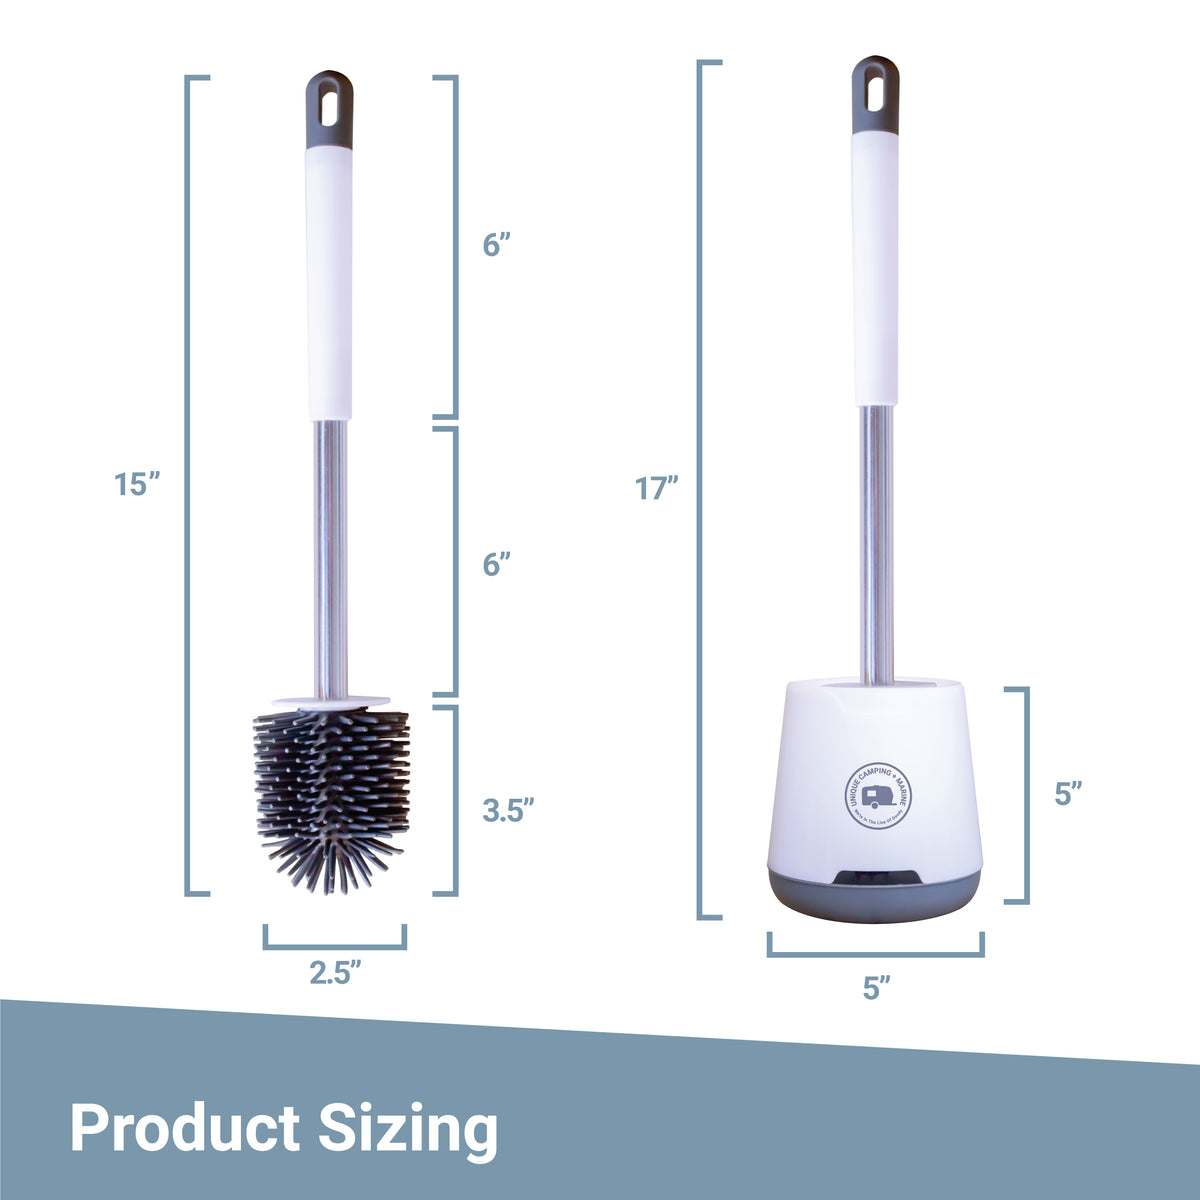 Product Sizing Chart for Silicone RV Toilet Brush and Holder. Unique Camping + Marine